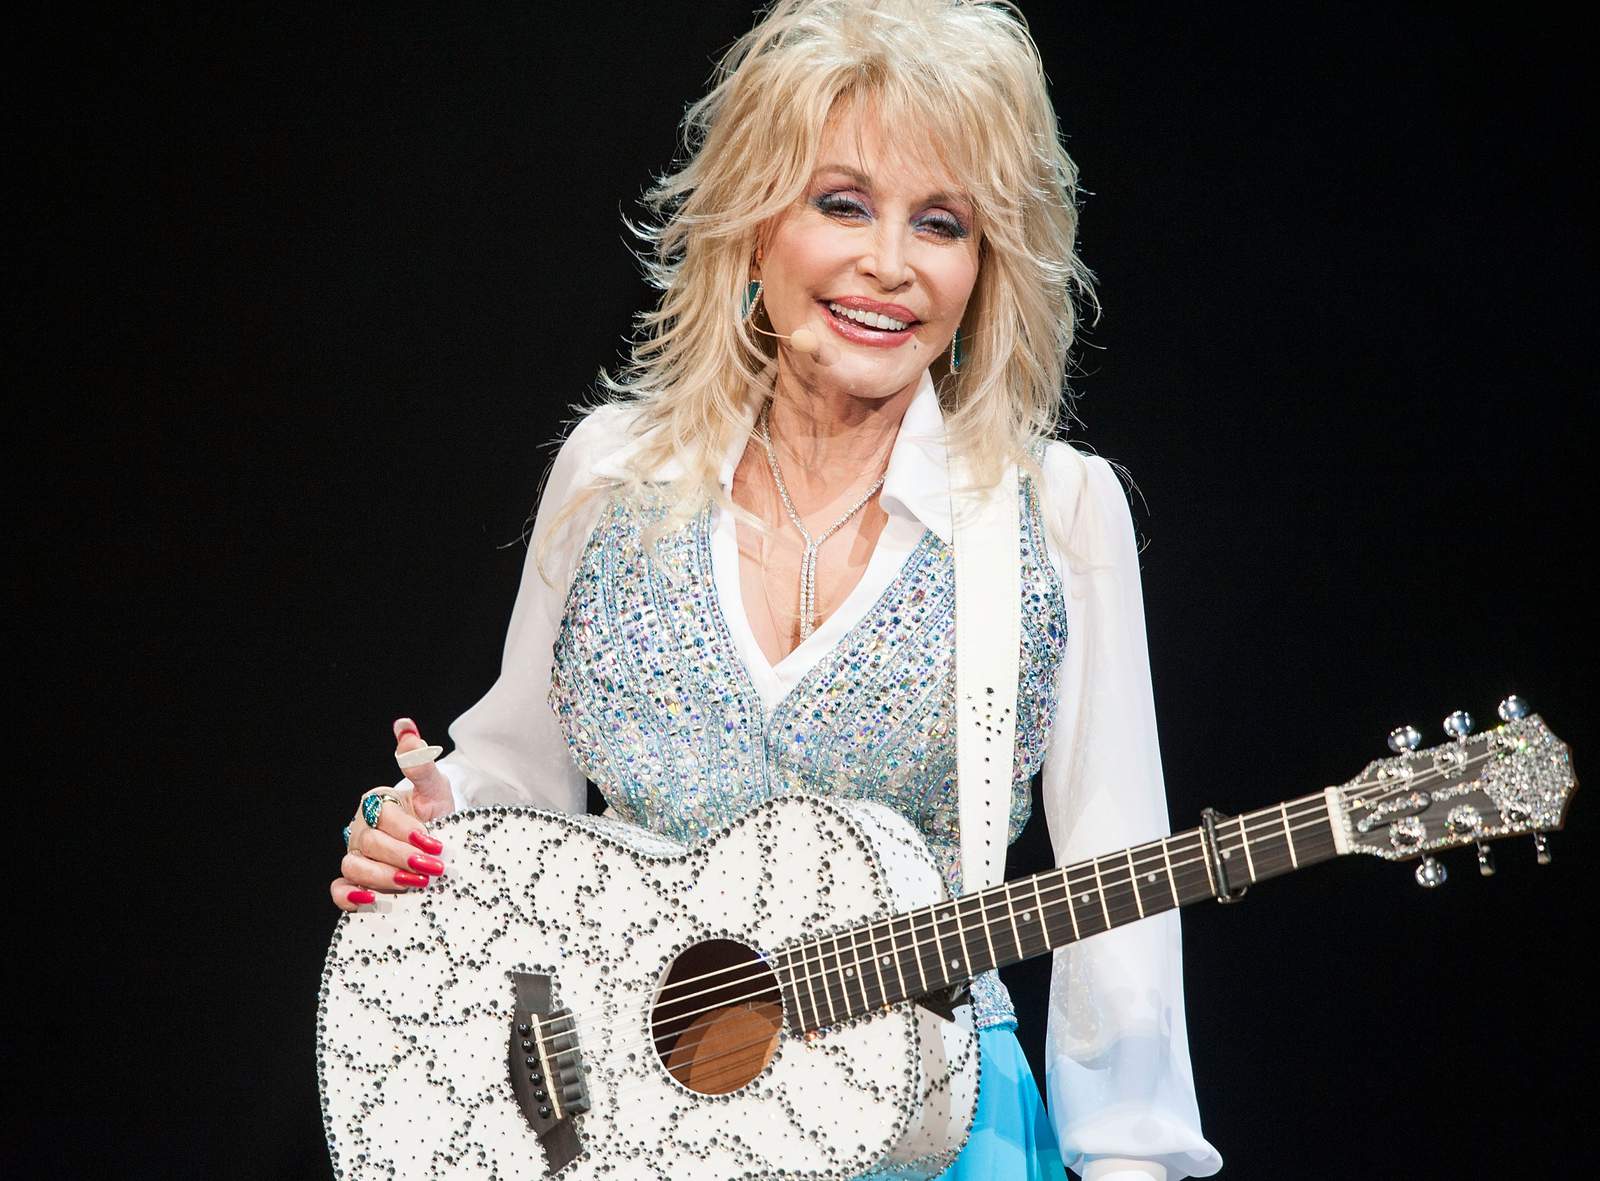 Tennessee lawmakers consider making ‘Amazing Grace’ by Dolly Parton official state song